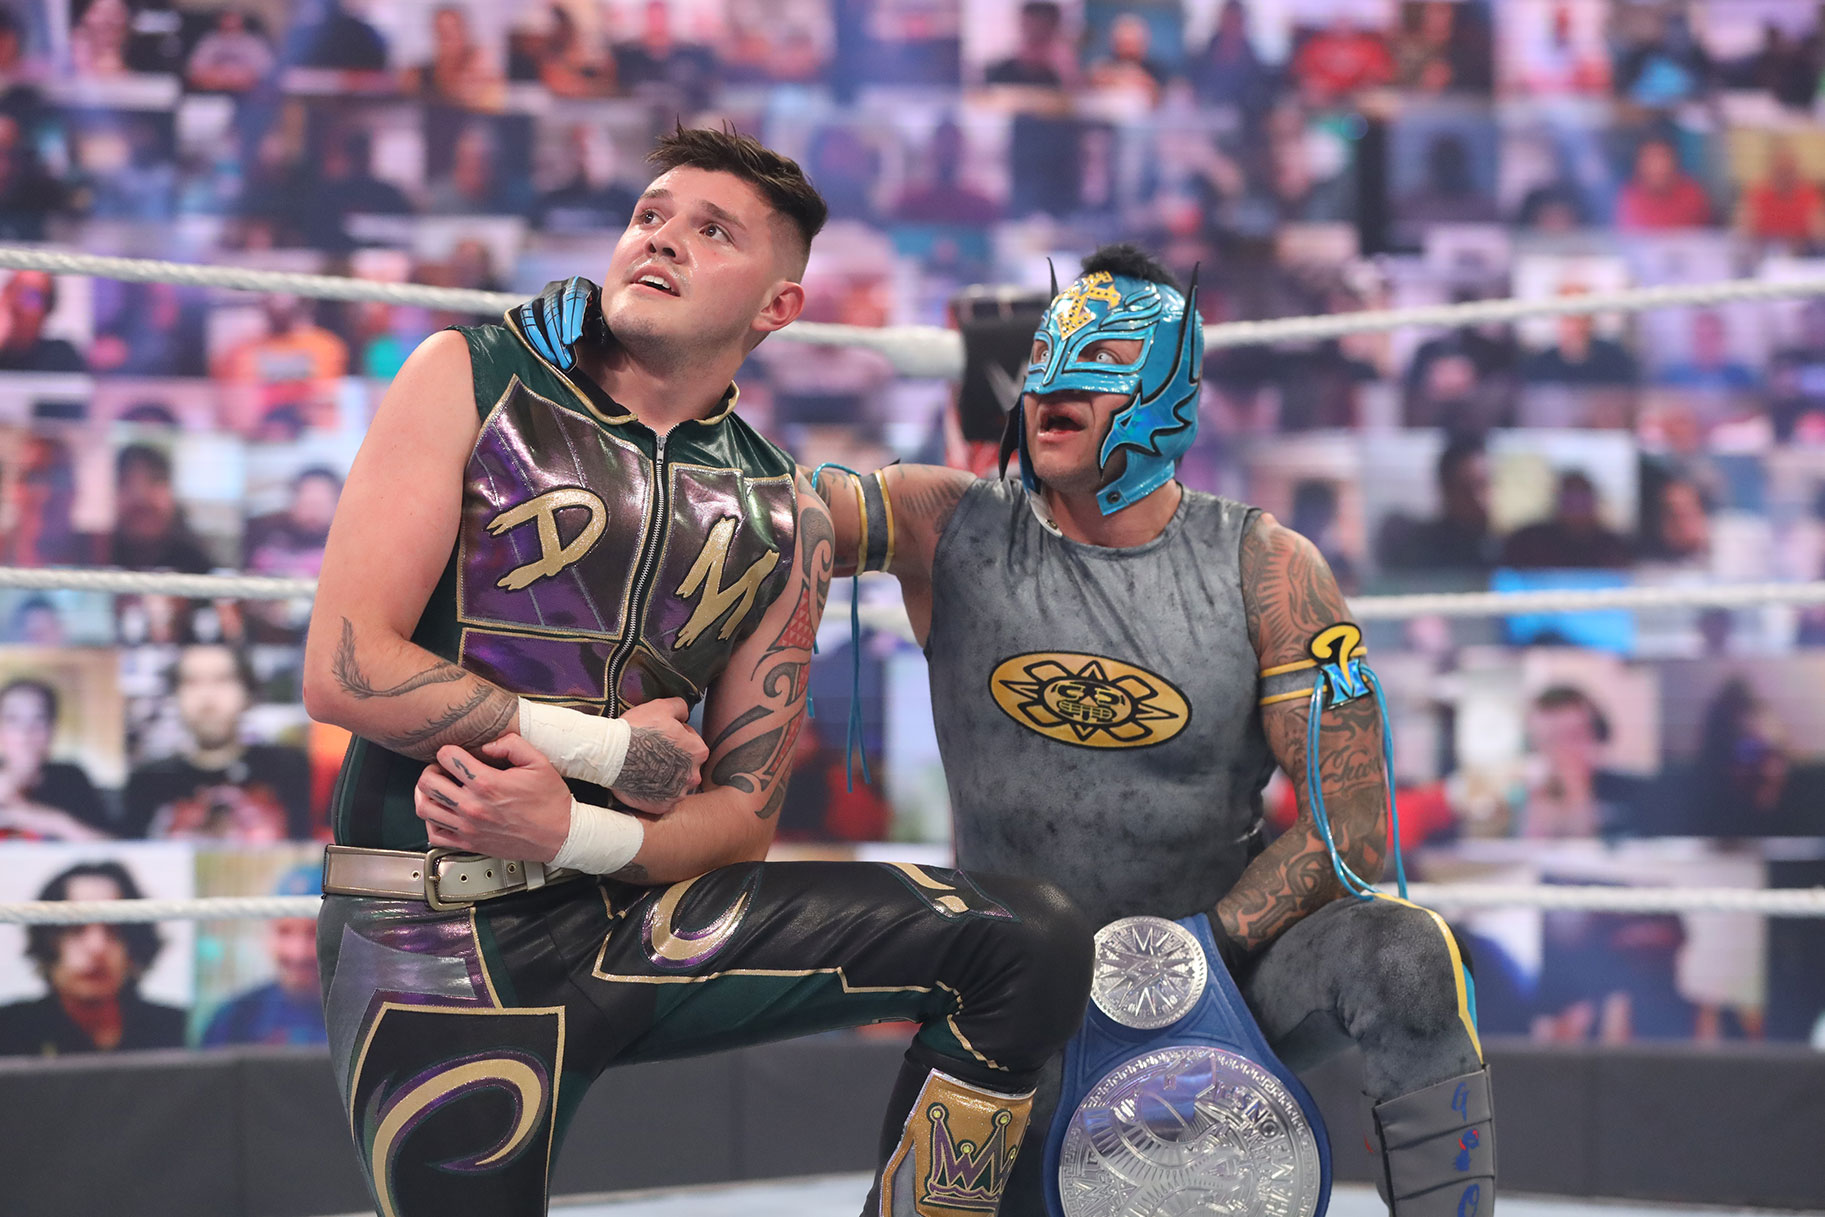 john cena and rey mysterio together